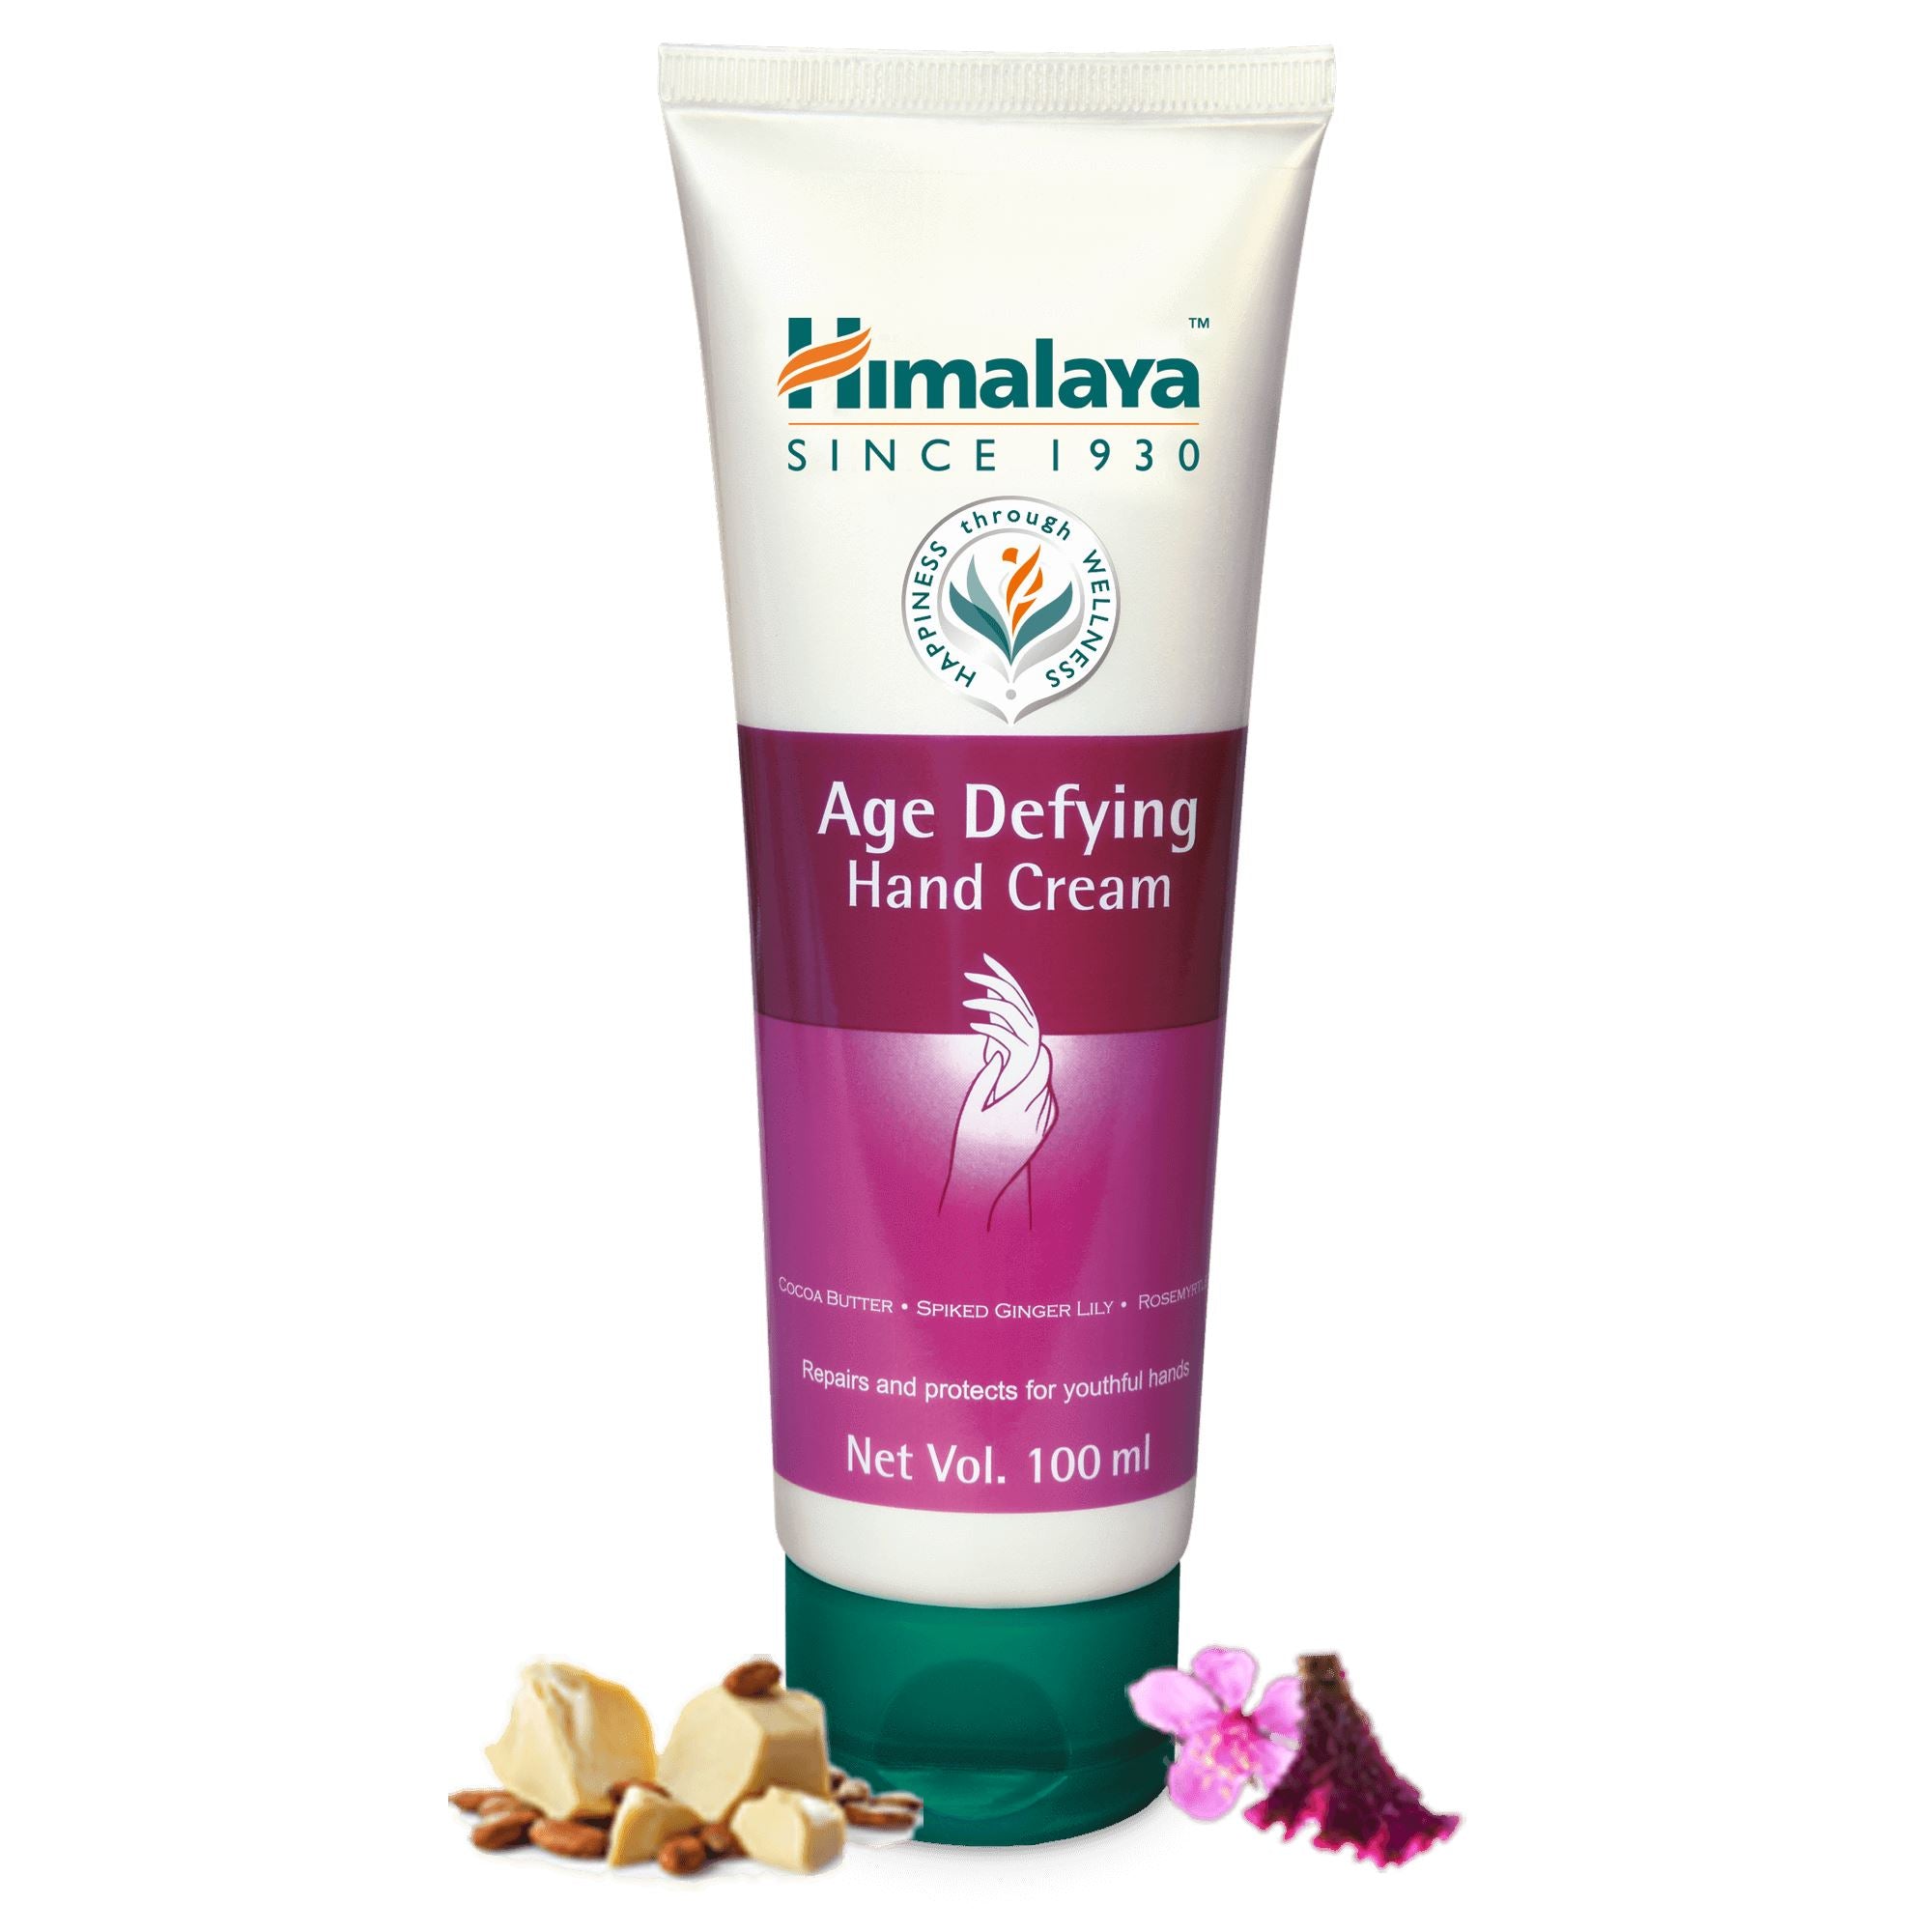 Himalaya Age Defying Hand Cream - Repairs and protects for youthful hands